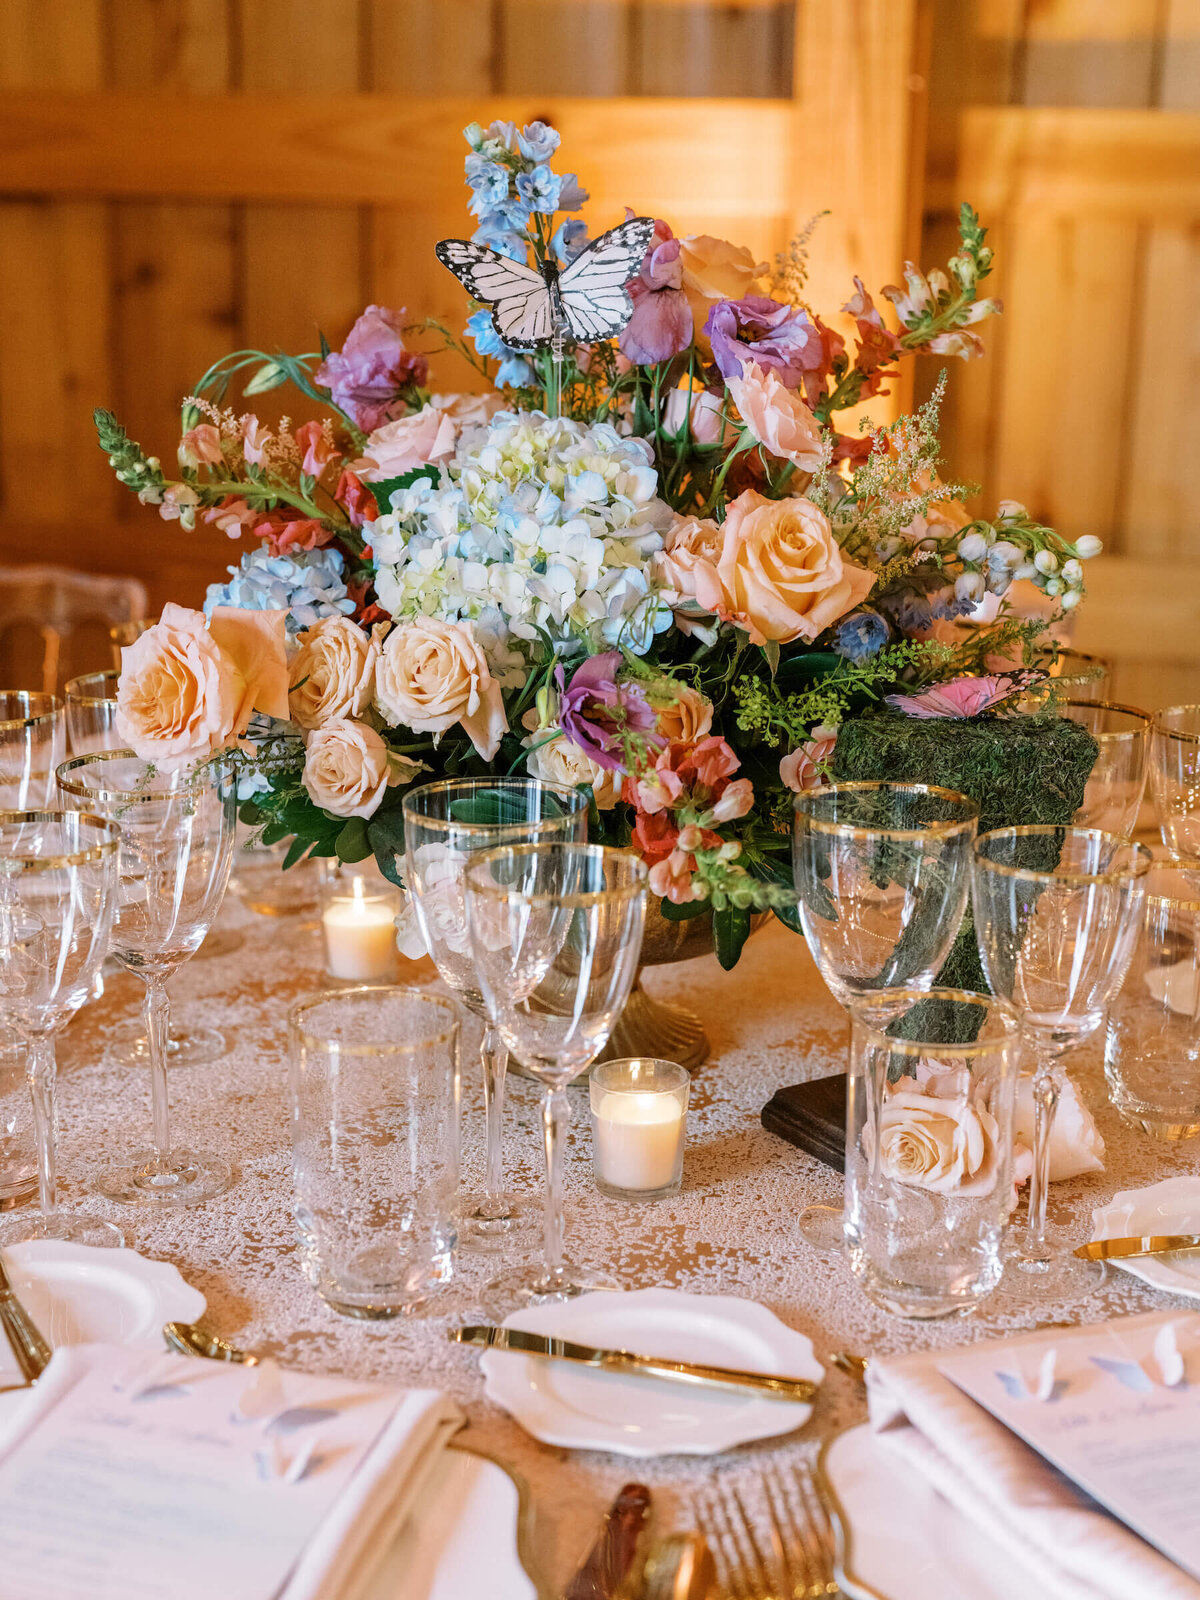 Farm wedding centerpiece of flowers and butterflies at Saddle Woods Farm in TN.